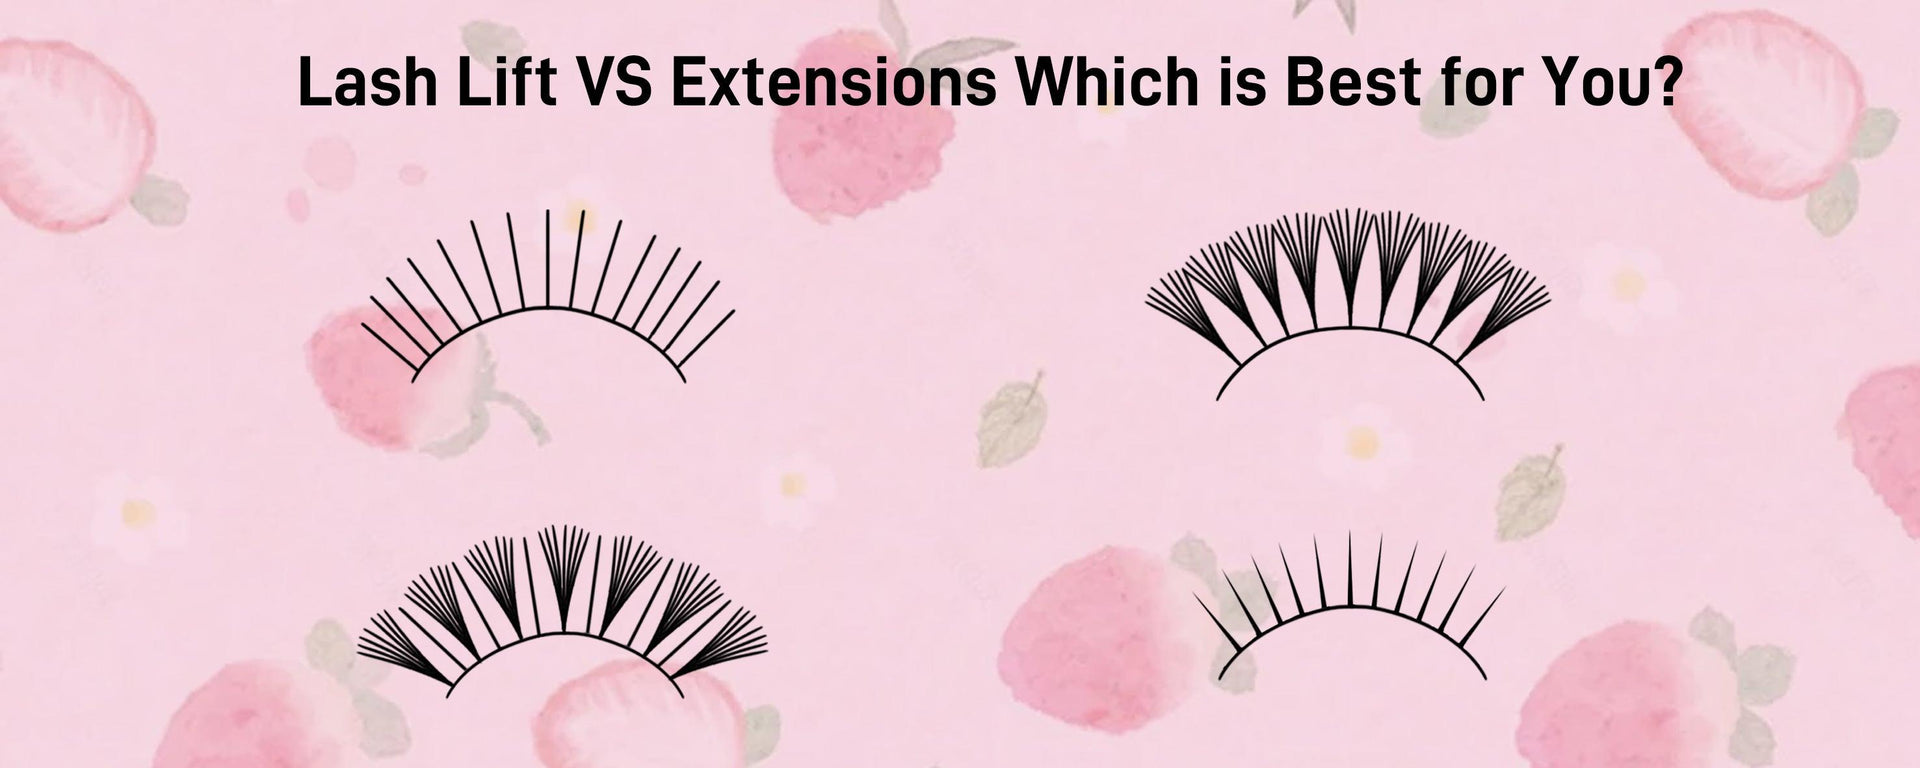 Lash Lift VS Extensions Which is Best for You? - VAVALASH